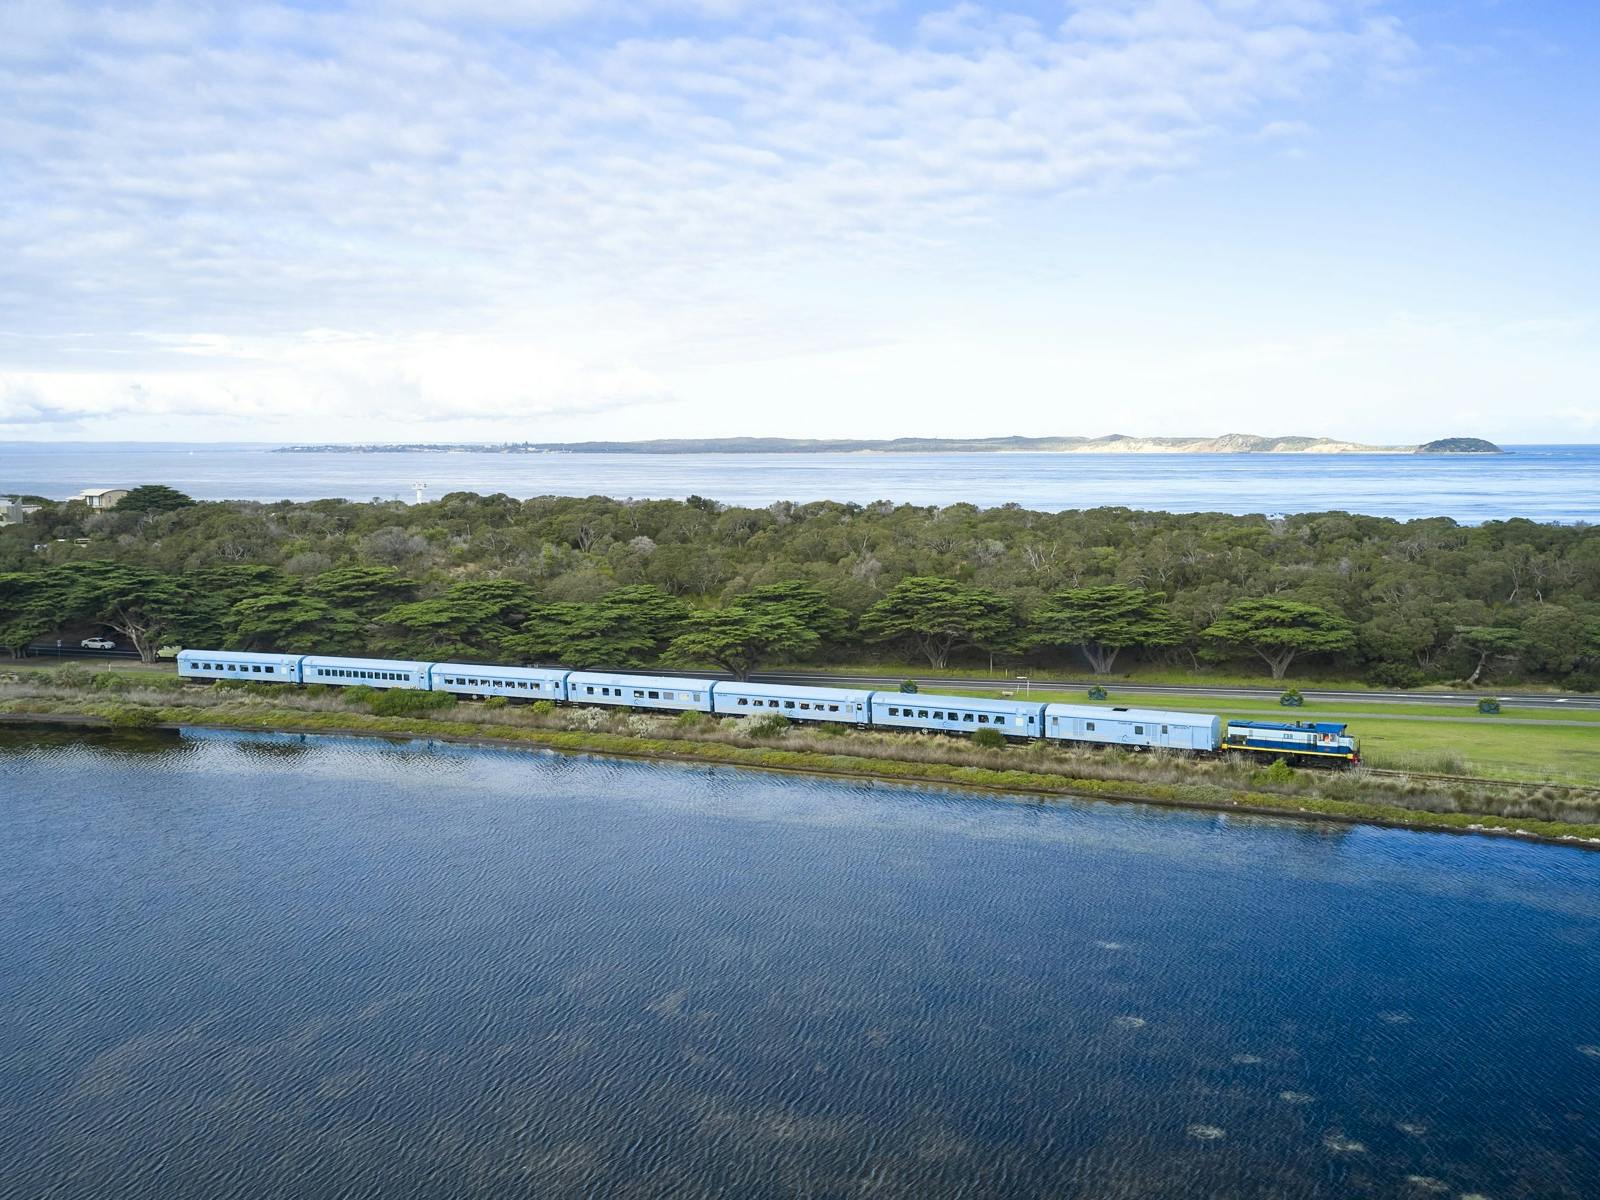 Blue train with 8 carriages and diesel locomotive passes by bay